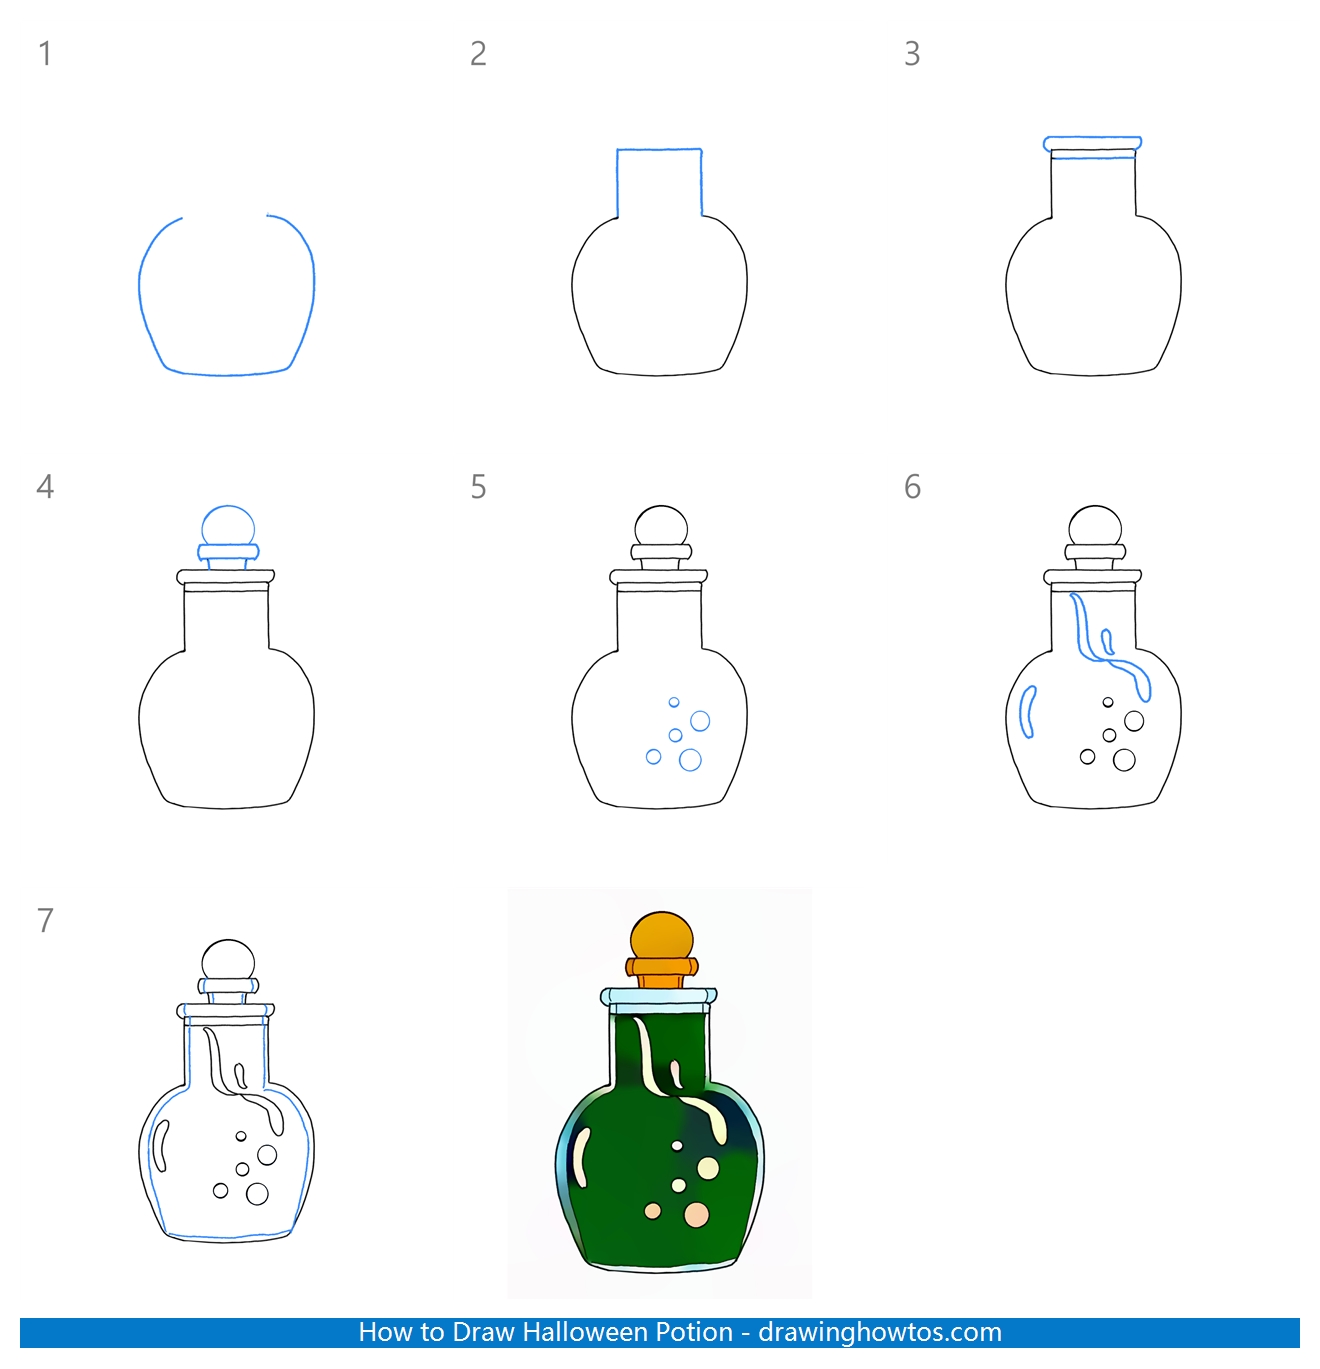 How to Draw Halloween Potion Step by Step